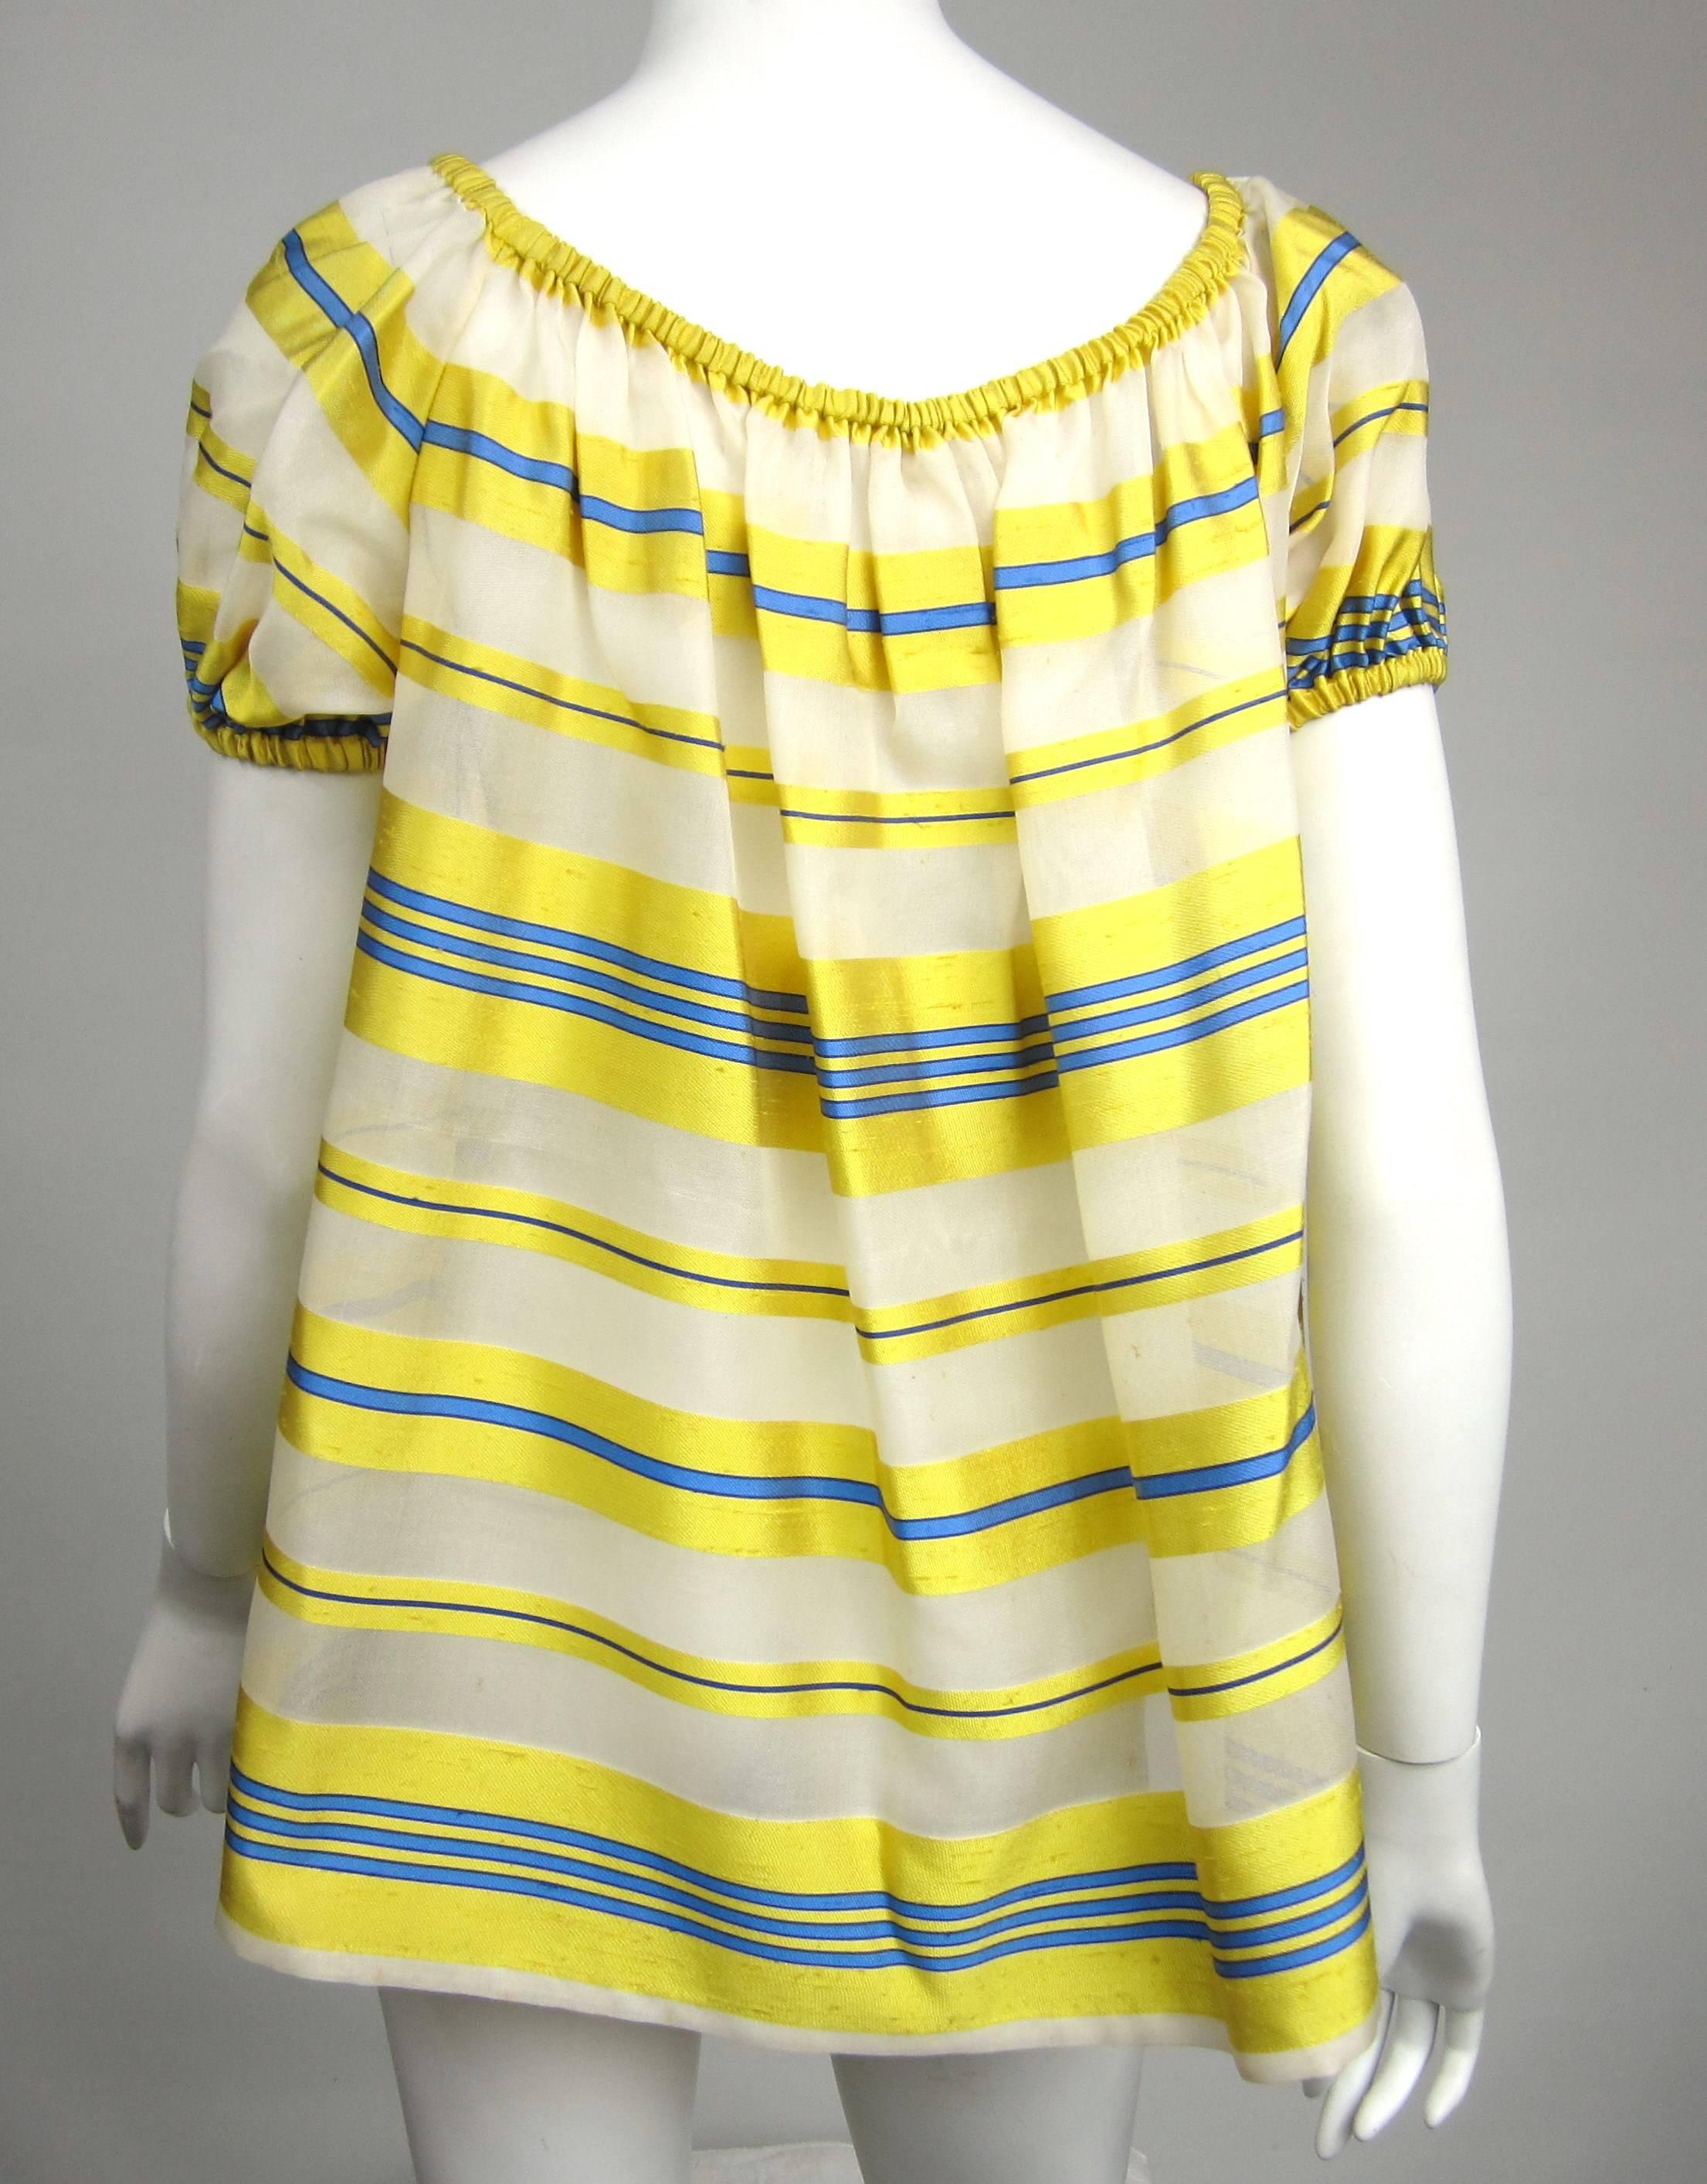 Yves Saint Laurent Silk Dupioni Over Sized Yellow Striped Blouse 1990s 1